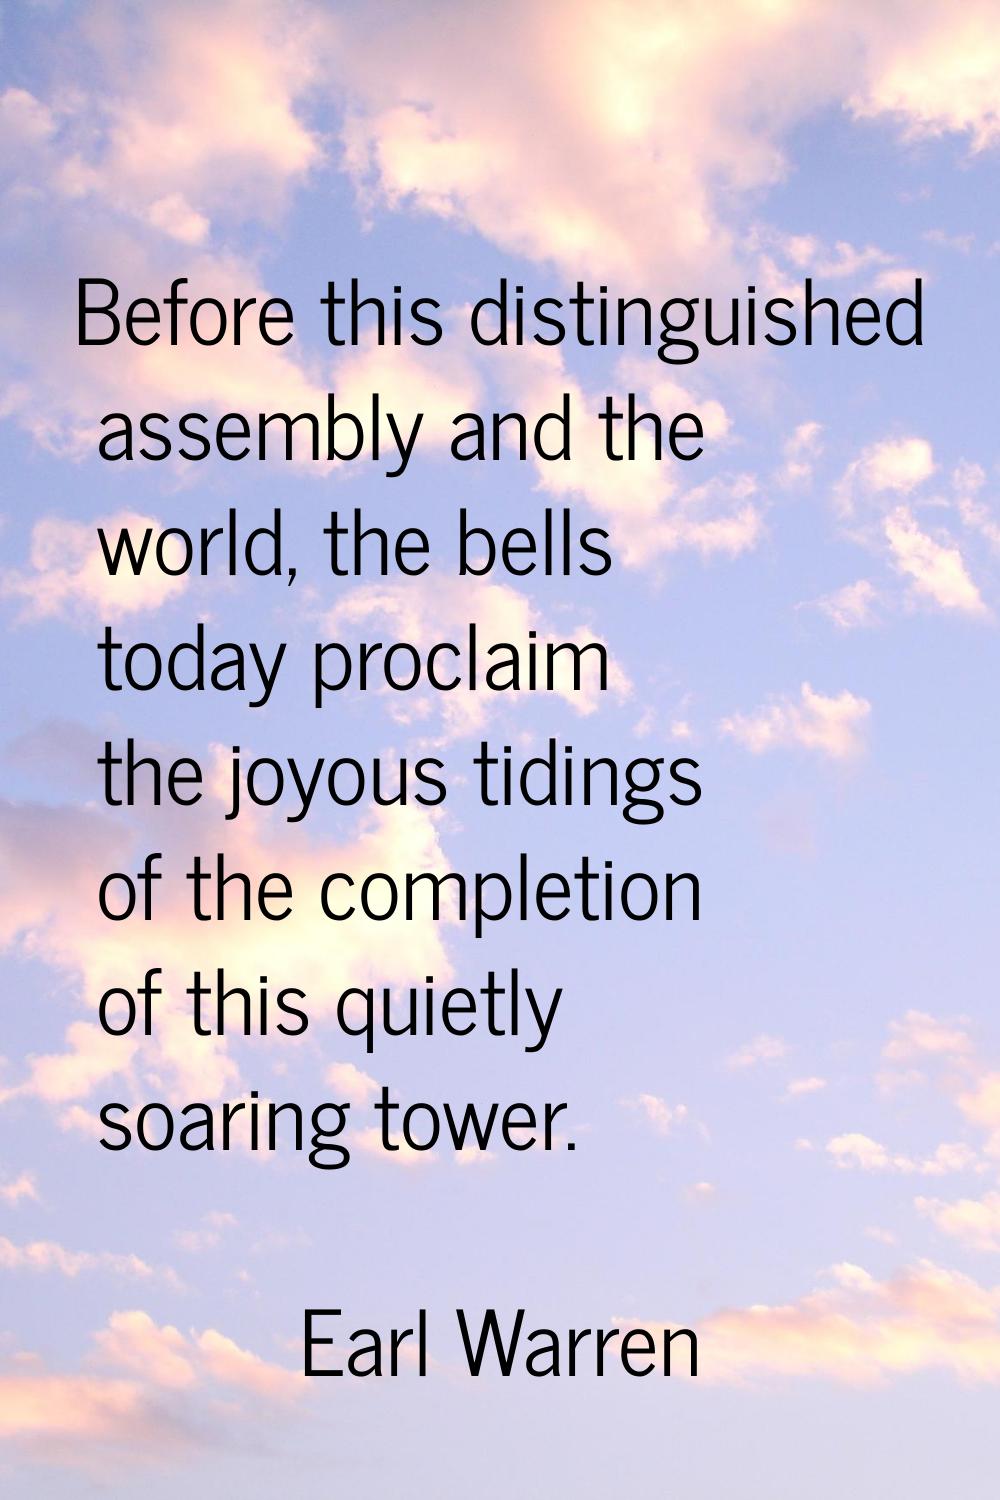 Before this distinguished assembly and the world, the bells today proclaim the joyous tidings of th